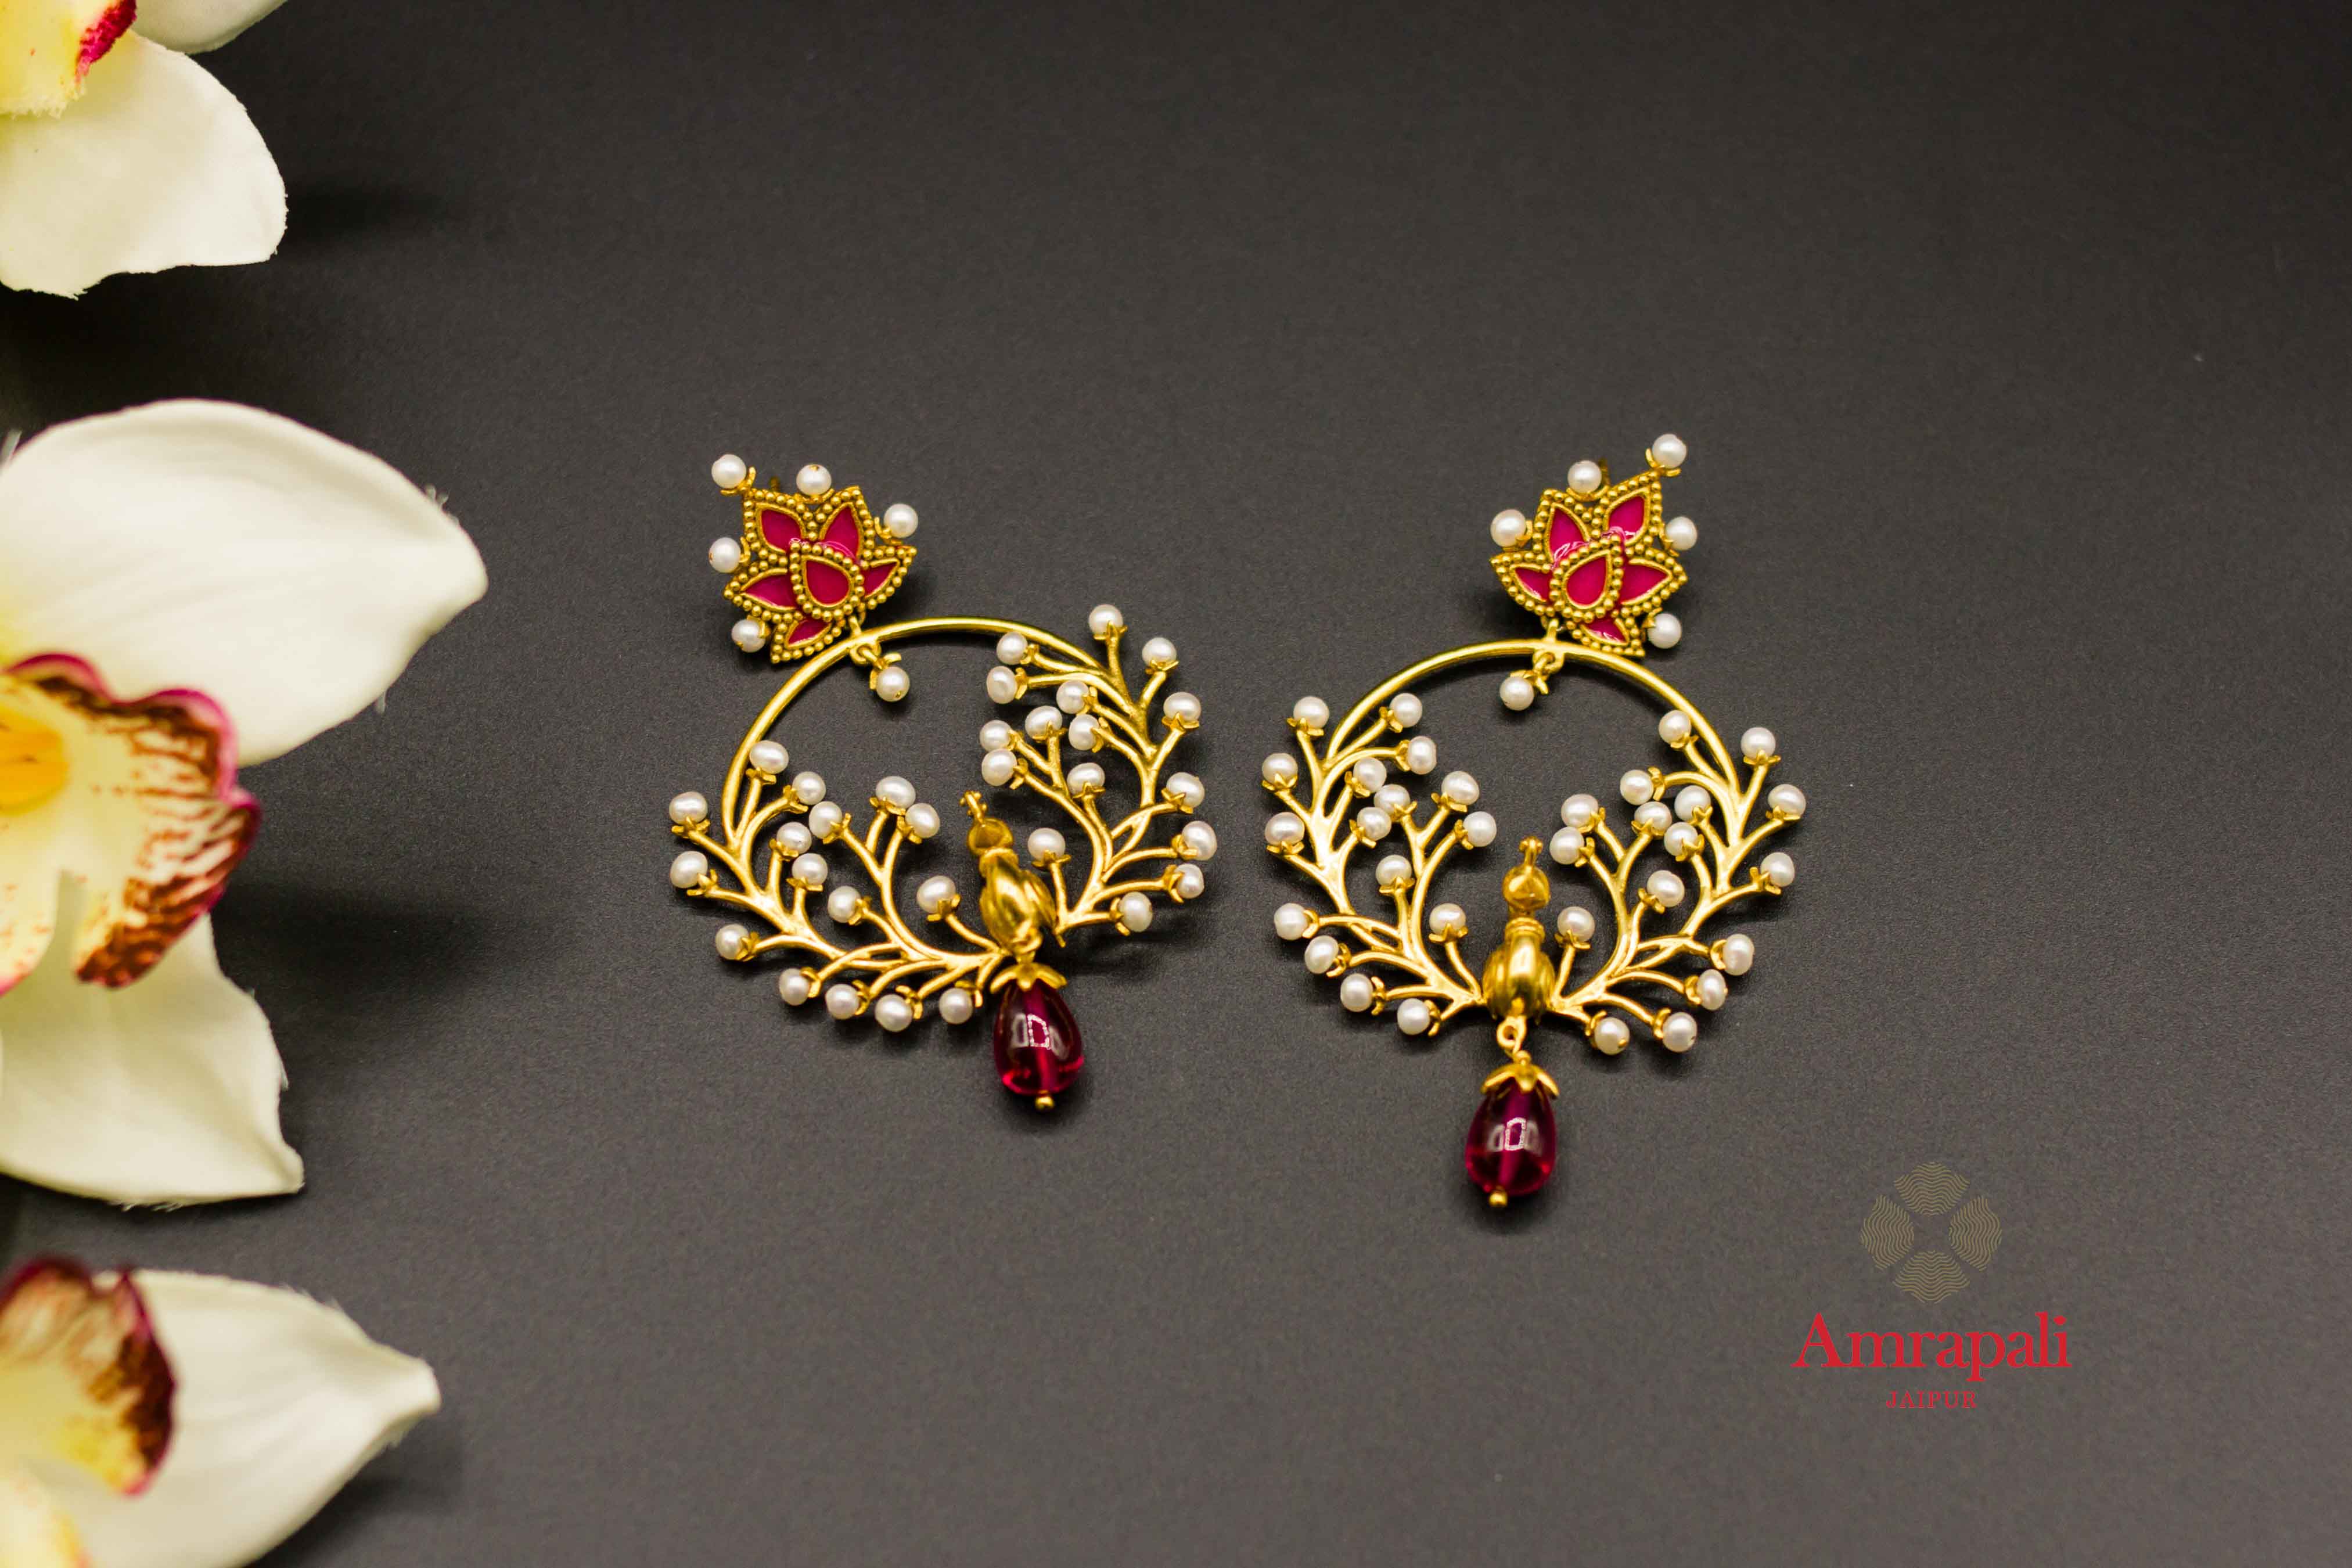 Buy Amrapali silver gold plated pearl peacock hoop earrings online in USA. Raise your ethnic style quotient on special occasions with exquisite Indian jewelry from Pure Elegance Indian clothing store in USA. Enhance your Indian look with silver gold plated jewelry, necklaces, fashion jewelry available online.-flatlay